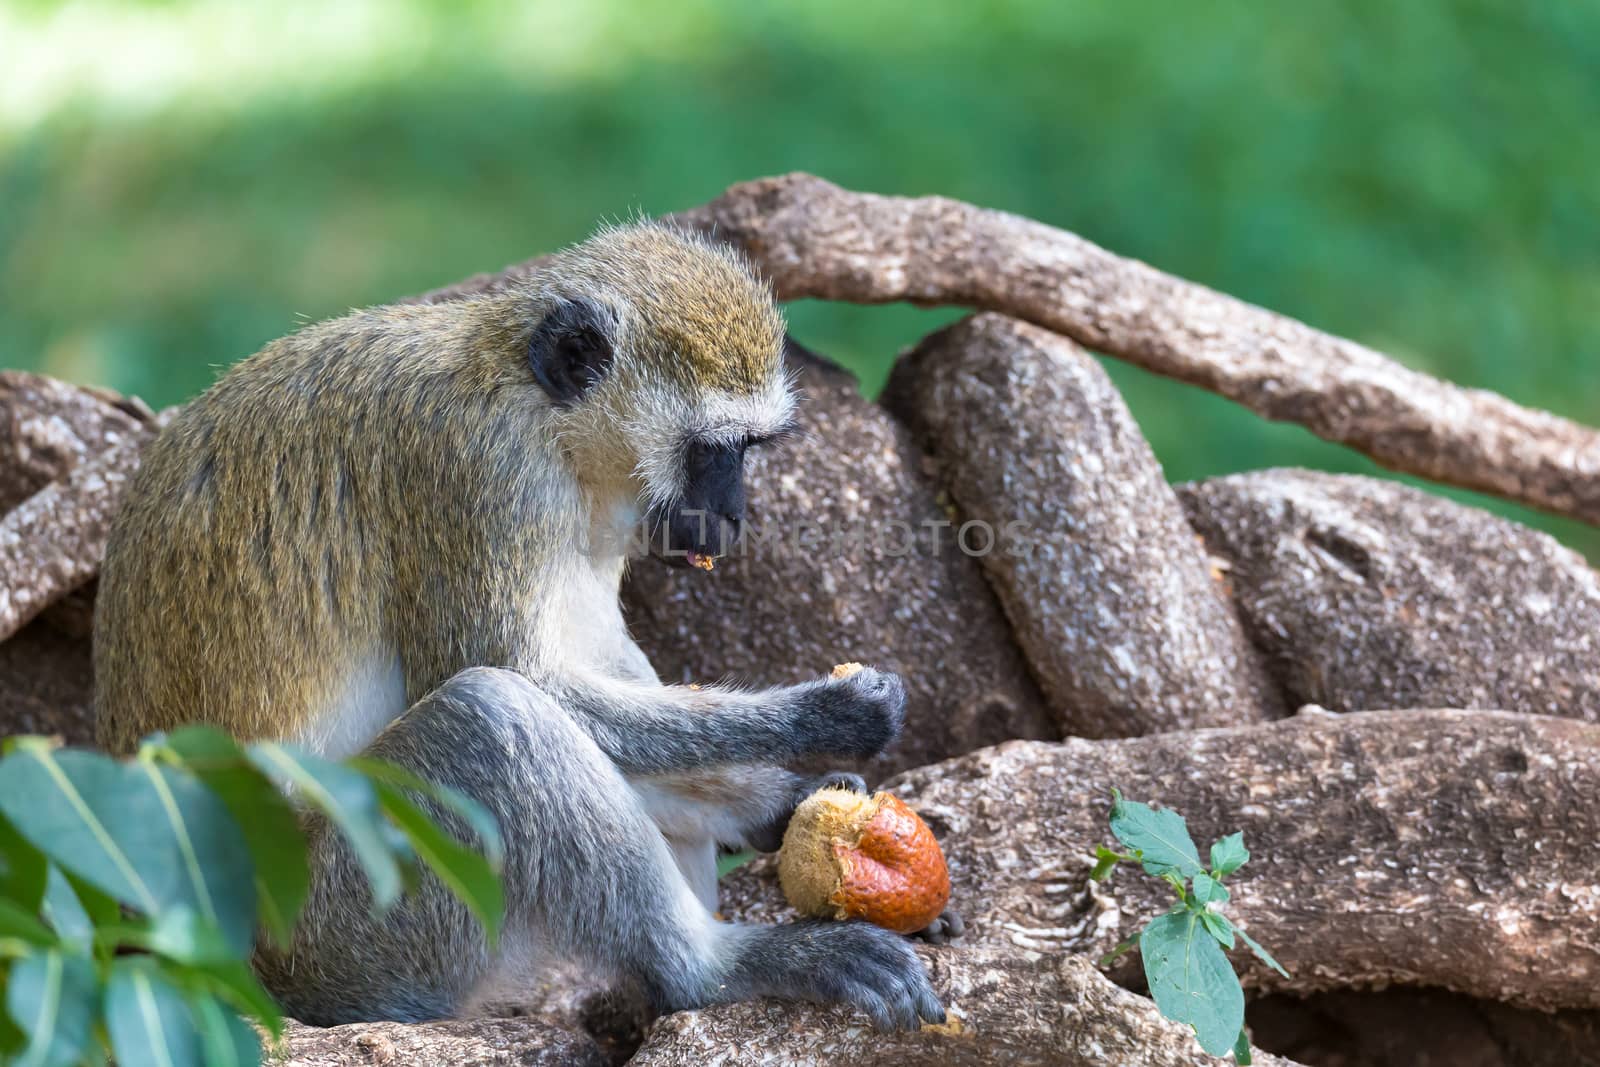 Monkey is doing a fruit meal in the grass by 25ehaag6